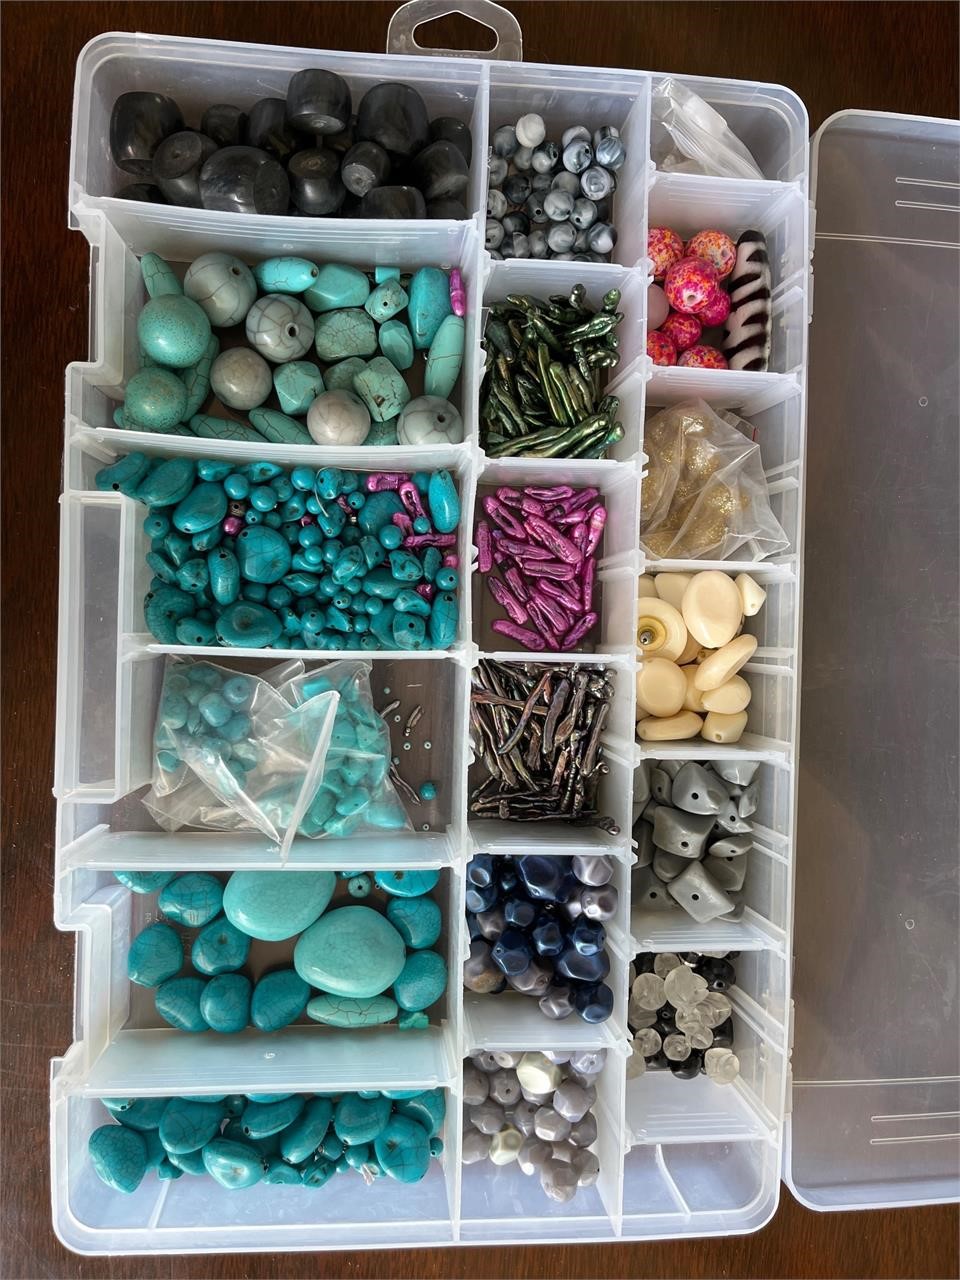 Beads and jewelry-making supplies galore!